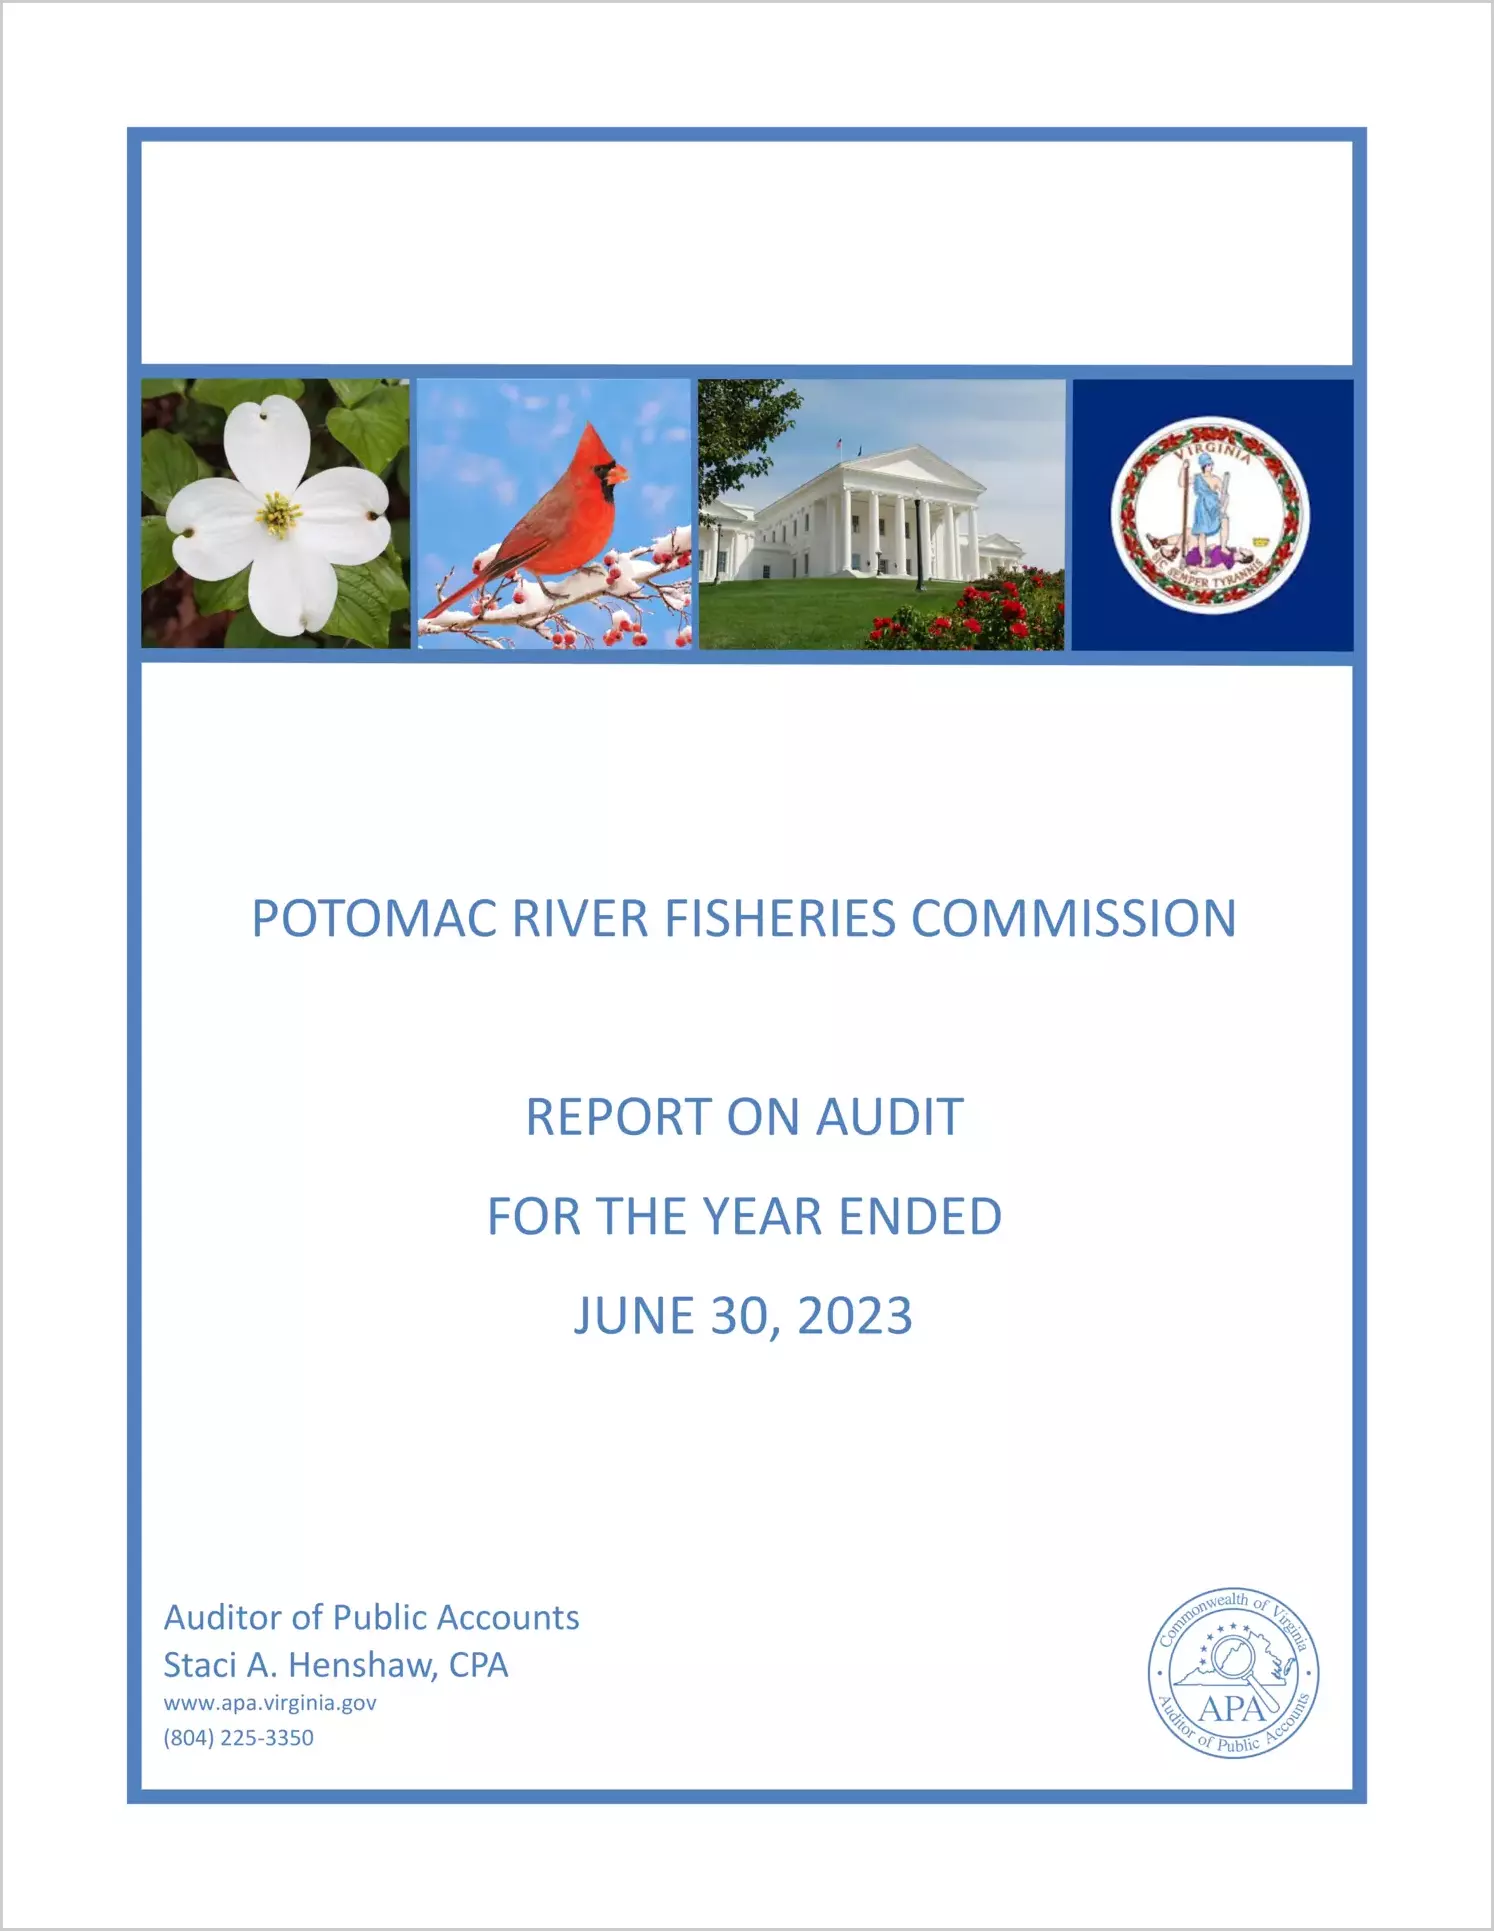 Potomac River Fisheries Commission for the year ended June 30, 2023